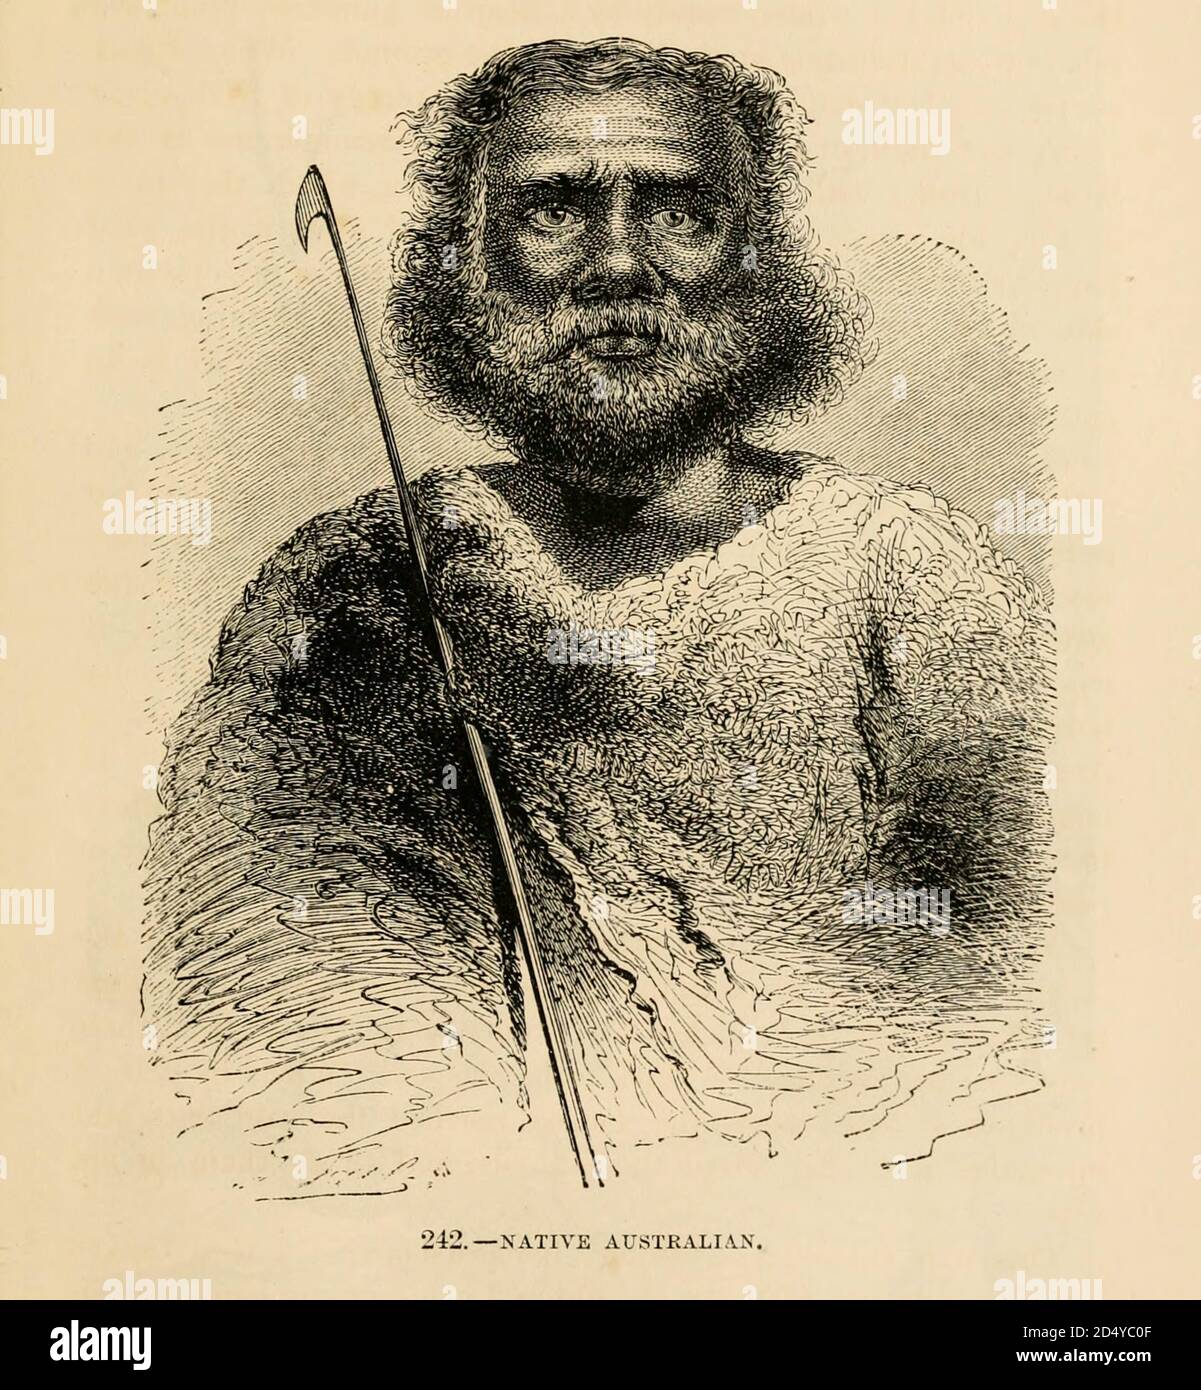 Portrait of a Native Australian engraving on wood From The human race by Figuier, Louis, (1819-1894) Publication in 1872 Publisher: New Appleton Stock Photo - Alamy